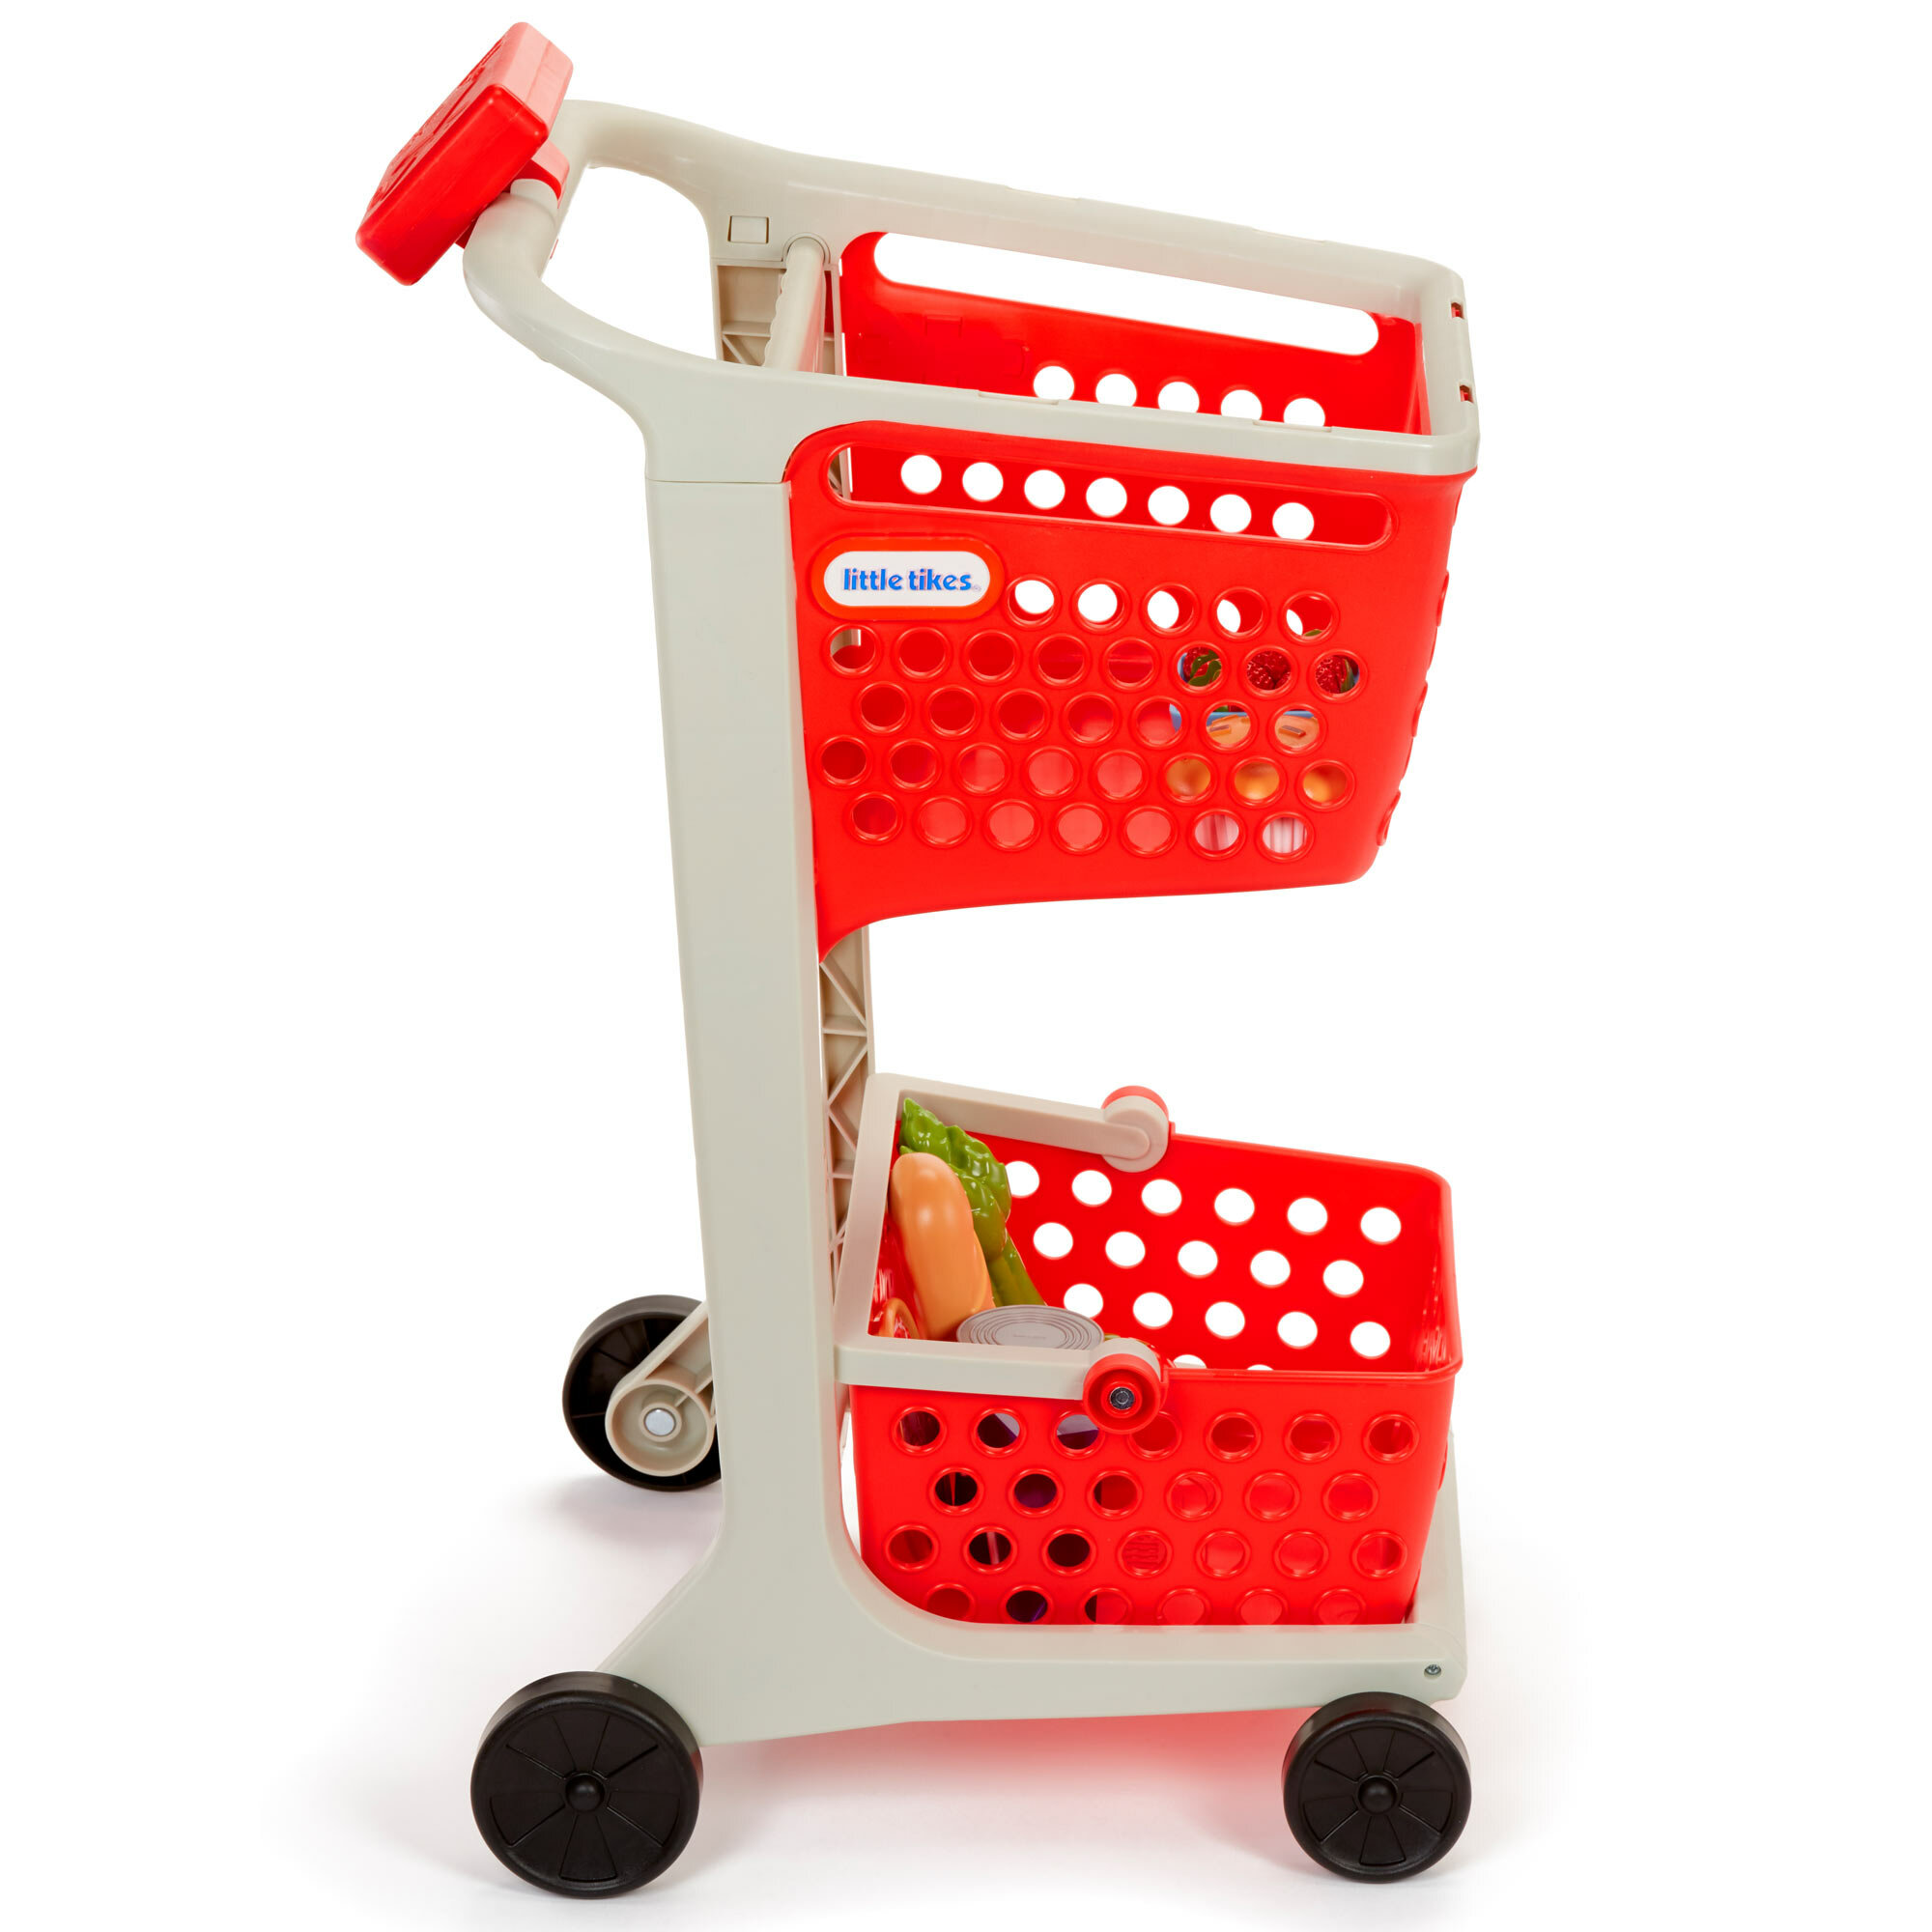 child's toy shopping cart